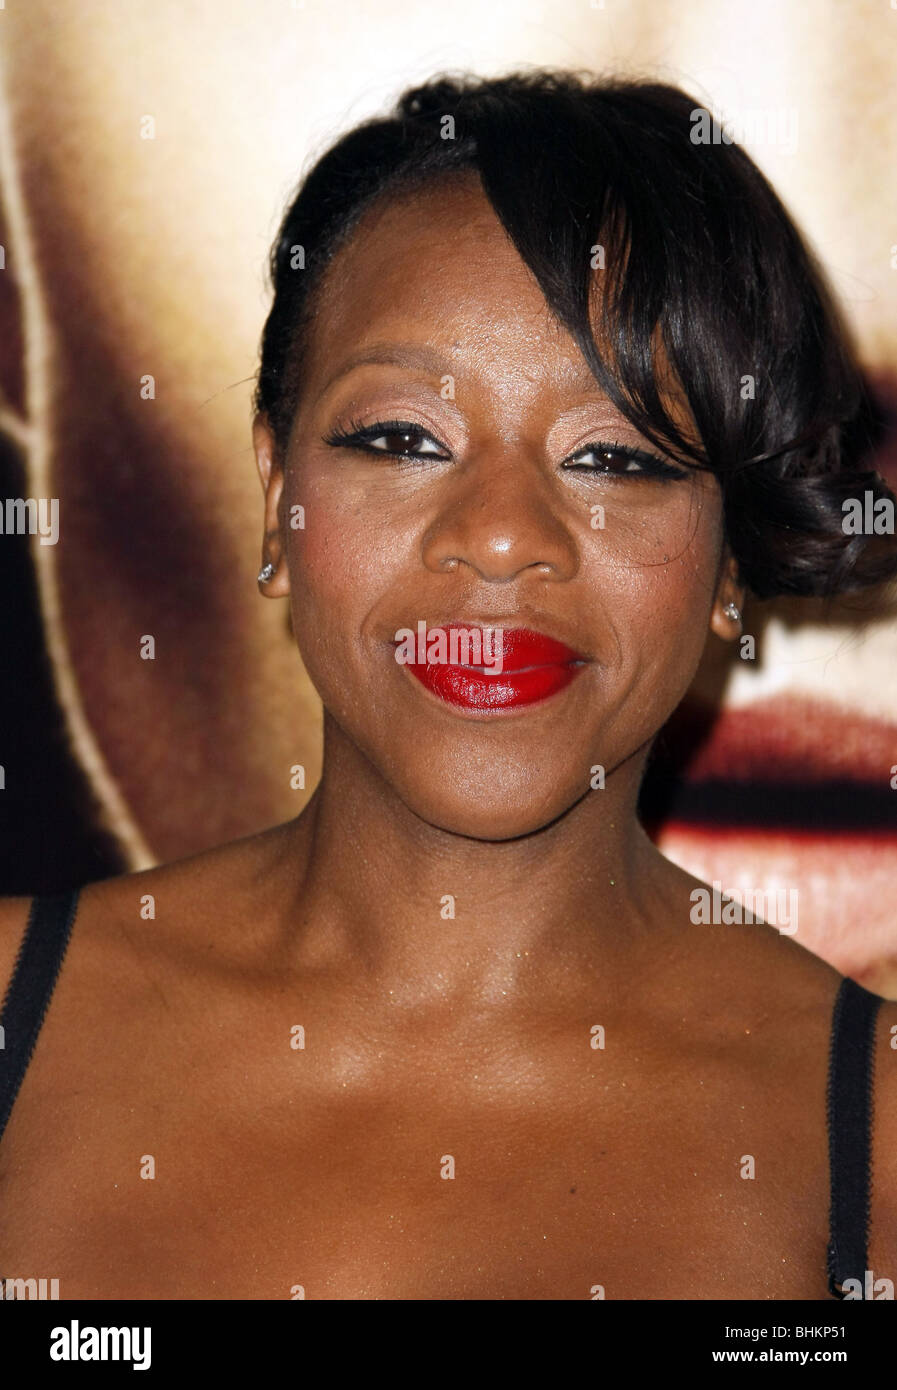 26+ Pictures of Marianne Jean Baptiste - Irama Gallery